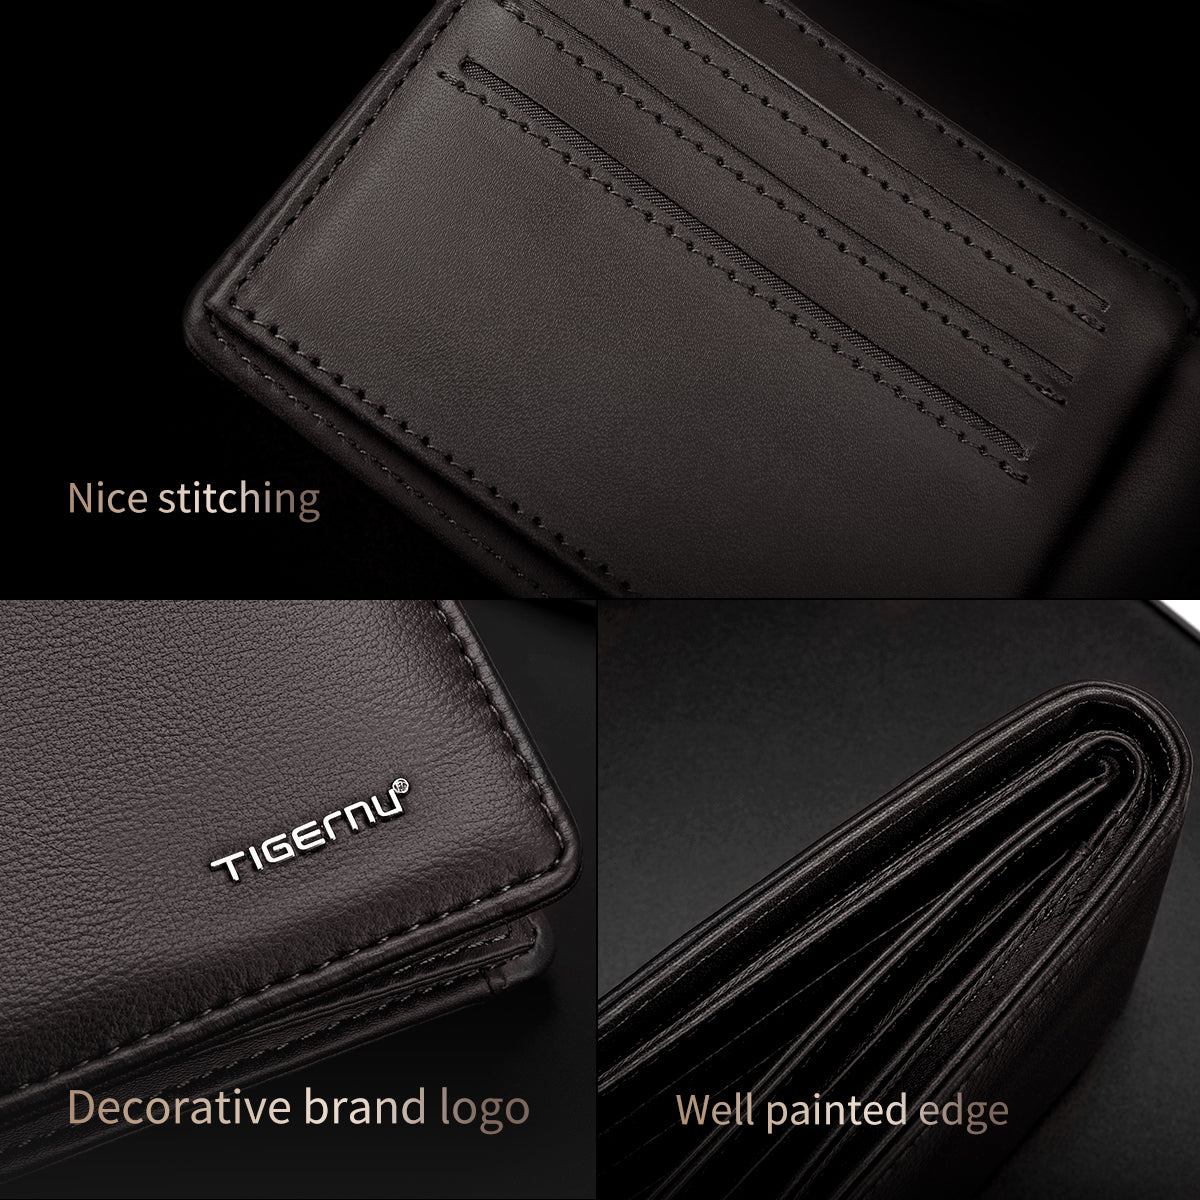 Tigernu men's artificial leather wallet, fashionable men's short wallet, credit card cardholder, men's small purse with gift box